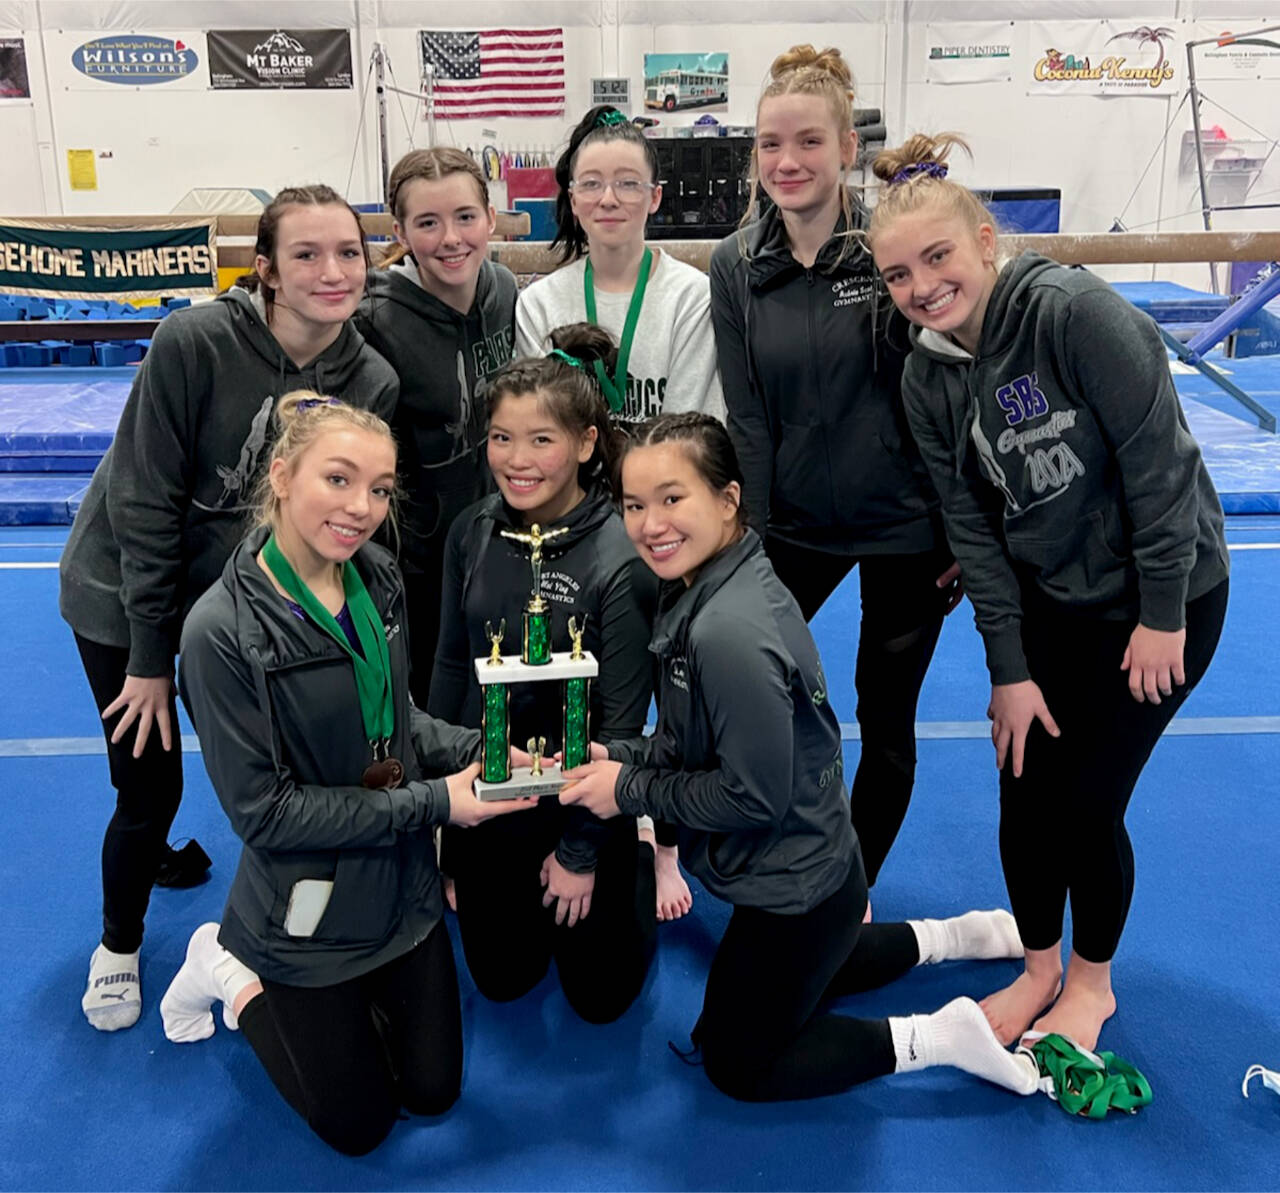 Courtesy photo The Port Angeles/Sequim/Crescent gymnastics team took second at the Sehome Invitational this weekend. From left, back row are Maddie Adams, Faith Carr, Jessamyn Schindler, Aubrie Scott and Alex Schmadeke. From left, front row are Susannah Sharp, Mei-Ying Harper-Smith and Yau Fu.